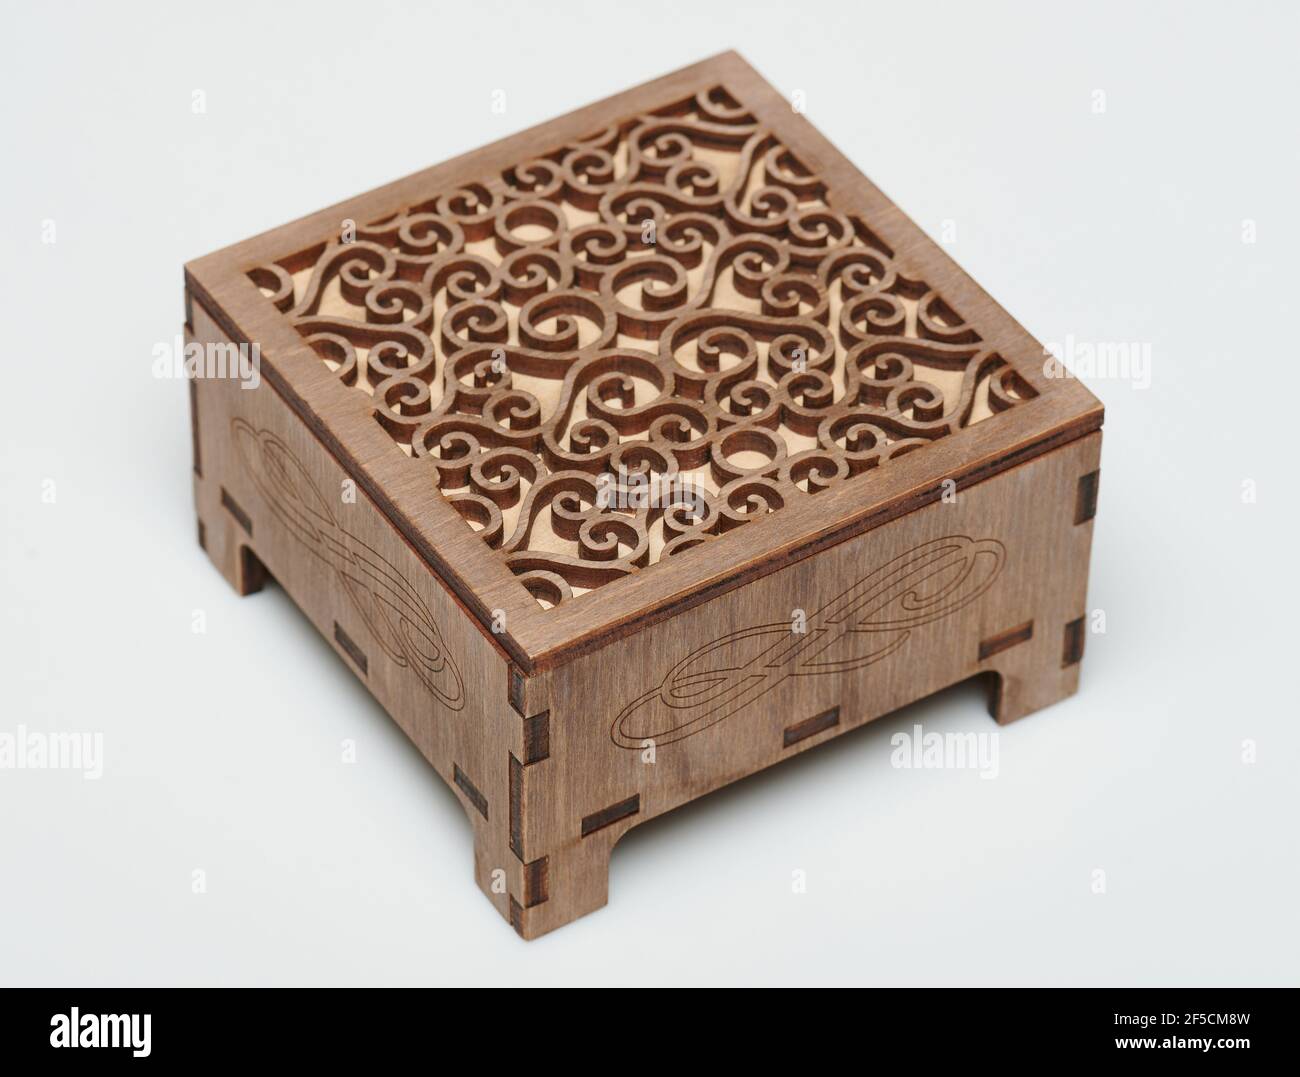 Vintage brown wooden box isometric isolated close up view Stock Photo